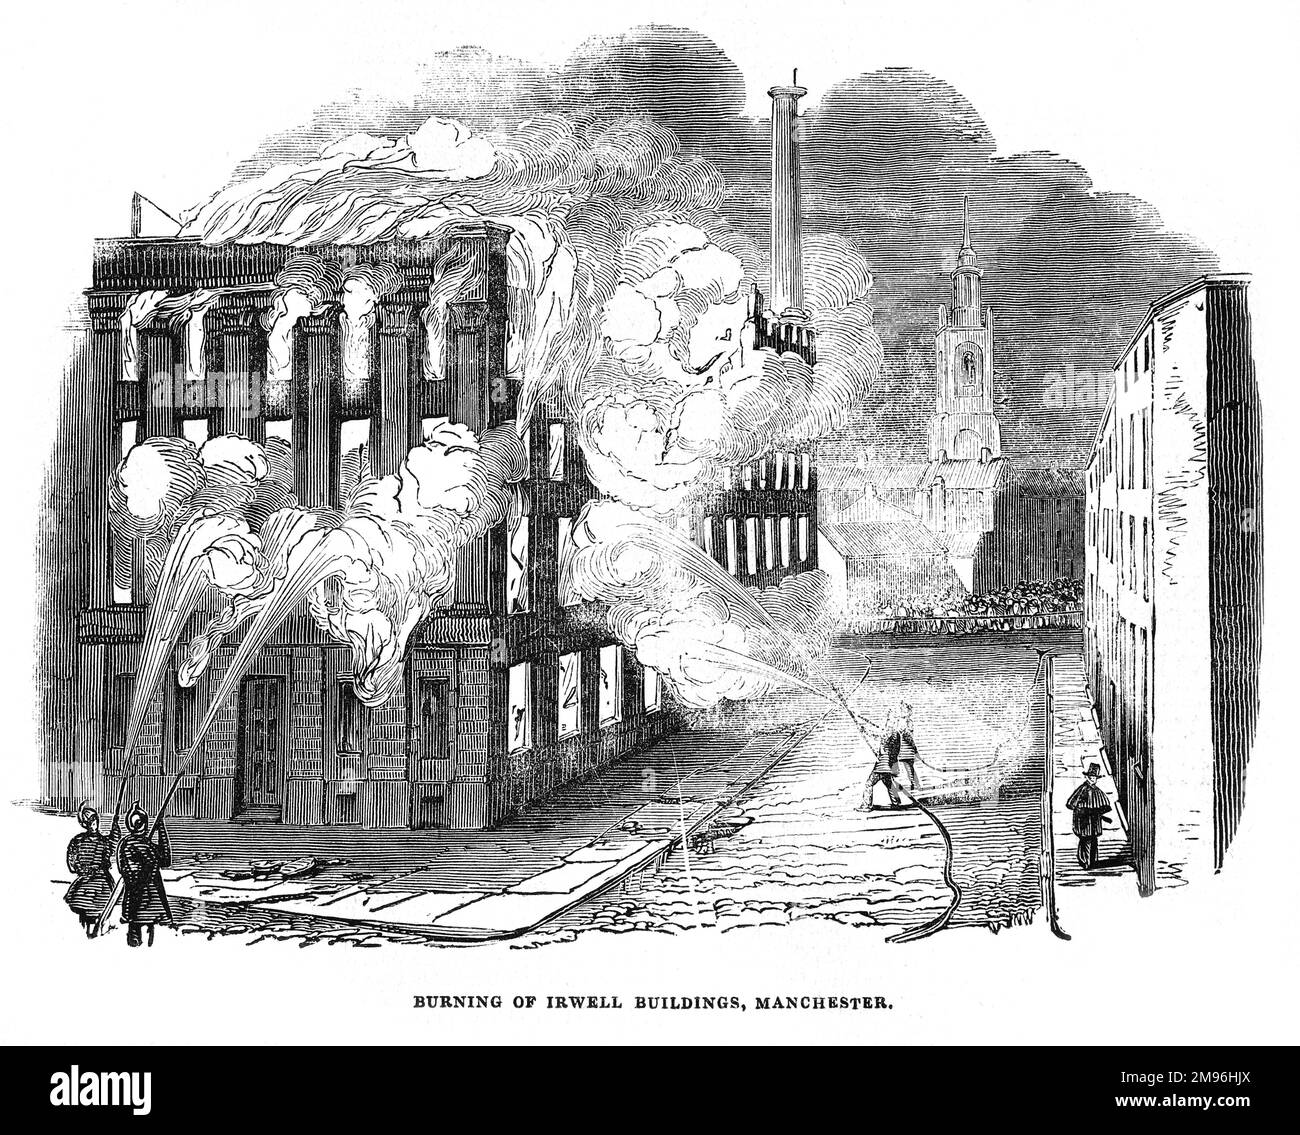 Burning of the Irwell Building, Manchester; Black and White Illustration from the London Illustrated News; août 1844. Banque D'Images